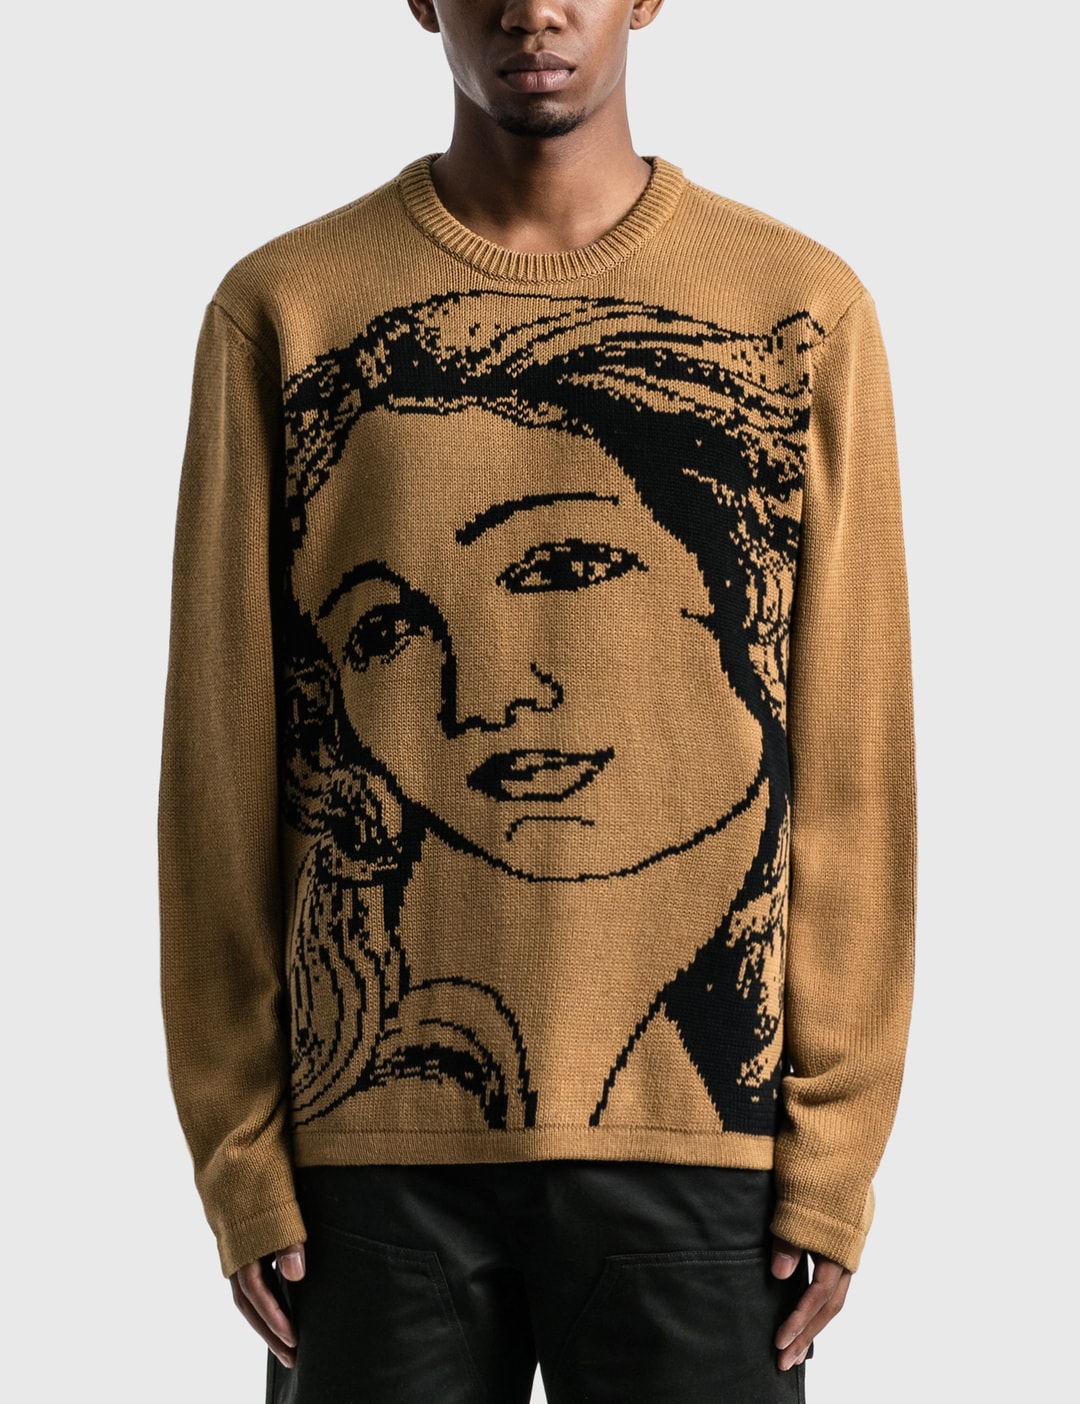 Stüssy - Venus Sweater | HBX - Globally Curated Fashion and Lifestyle ...